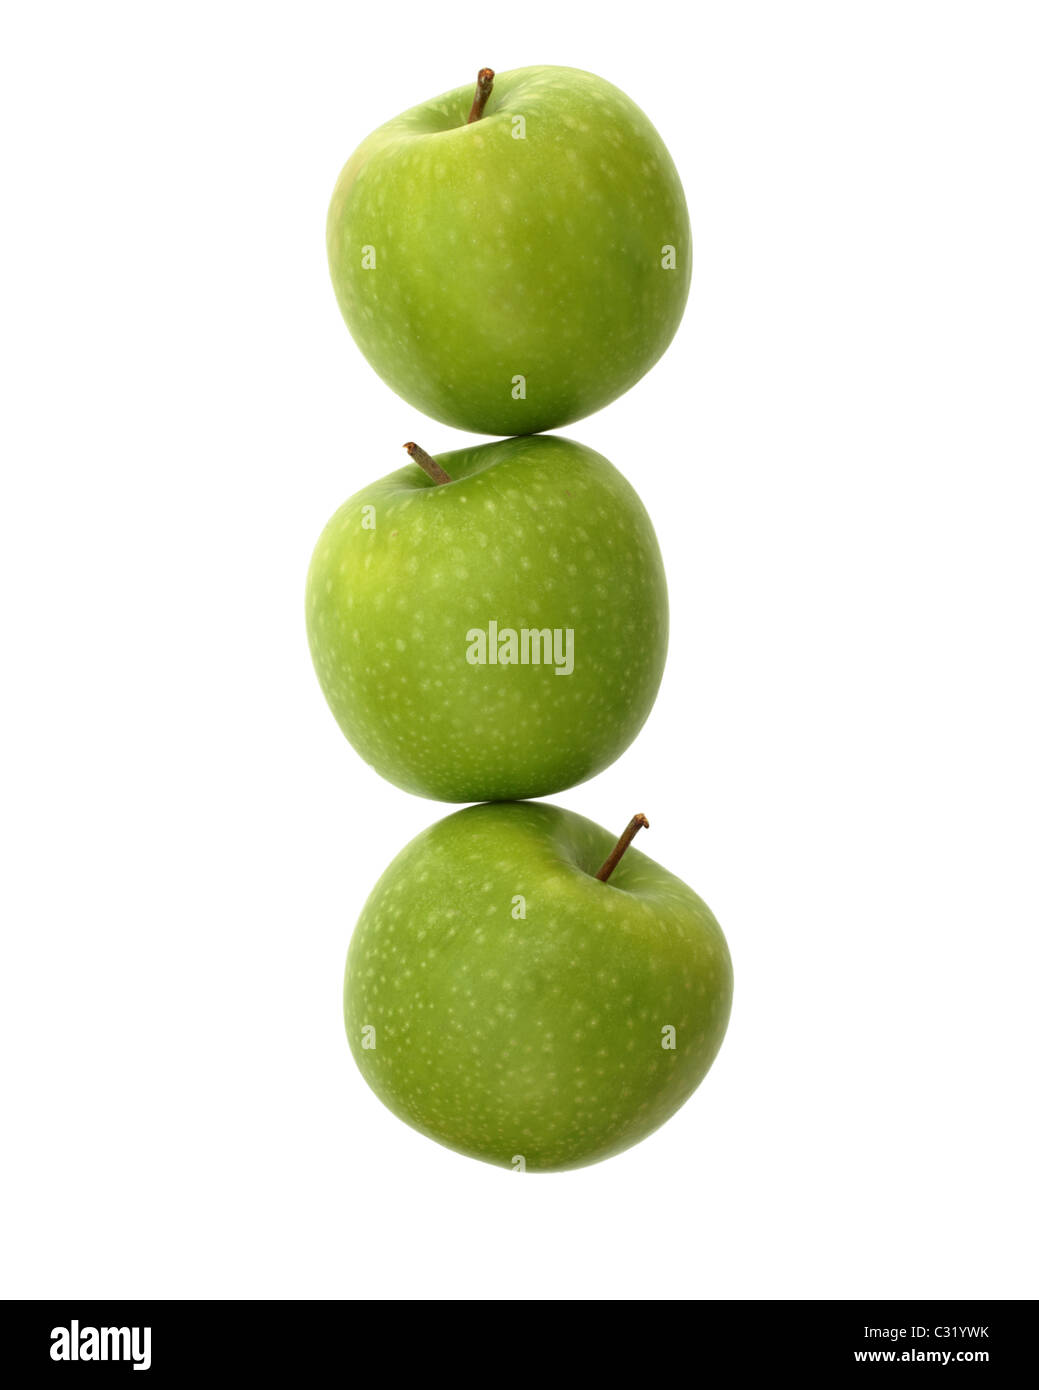 https://c8.alamy.com/comp/C31YWK/three-green-apples-as-if-stacked-on-top-of-each-other-isolated-on-C31YWK.jpg